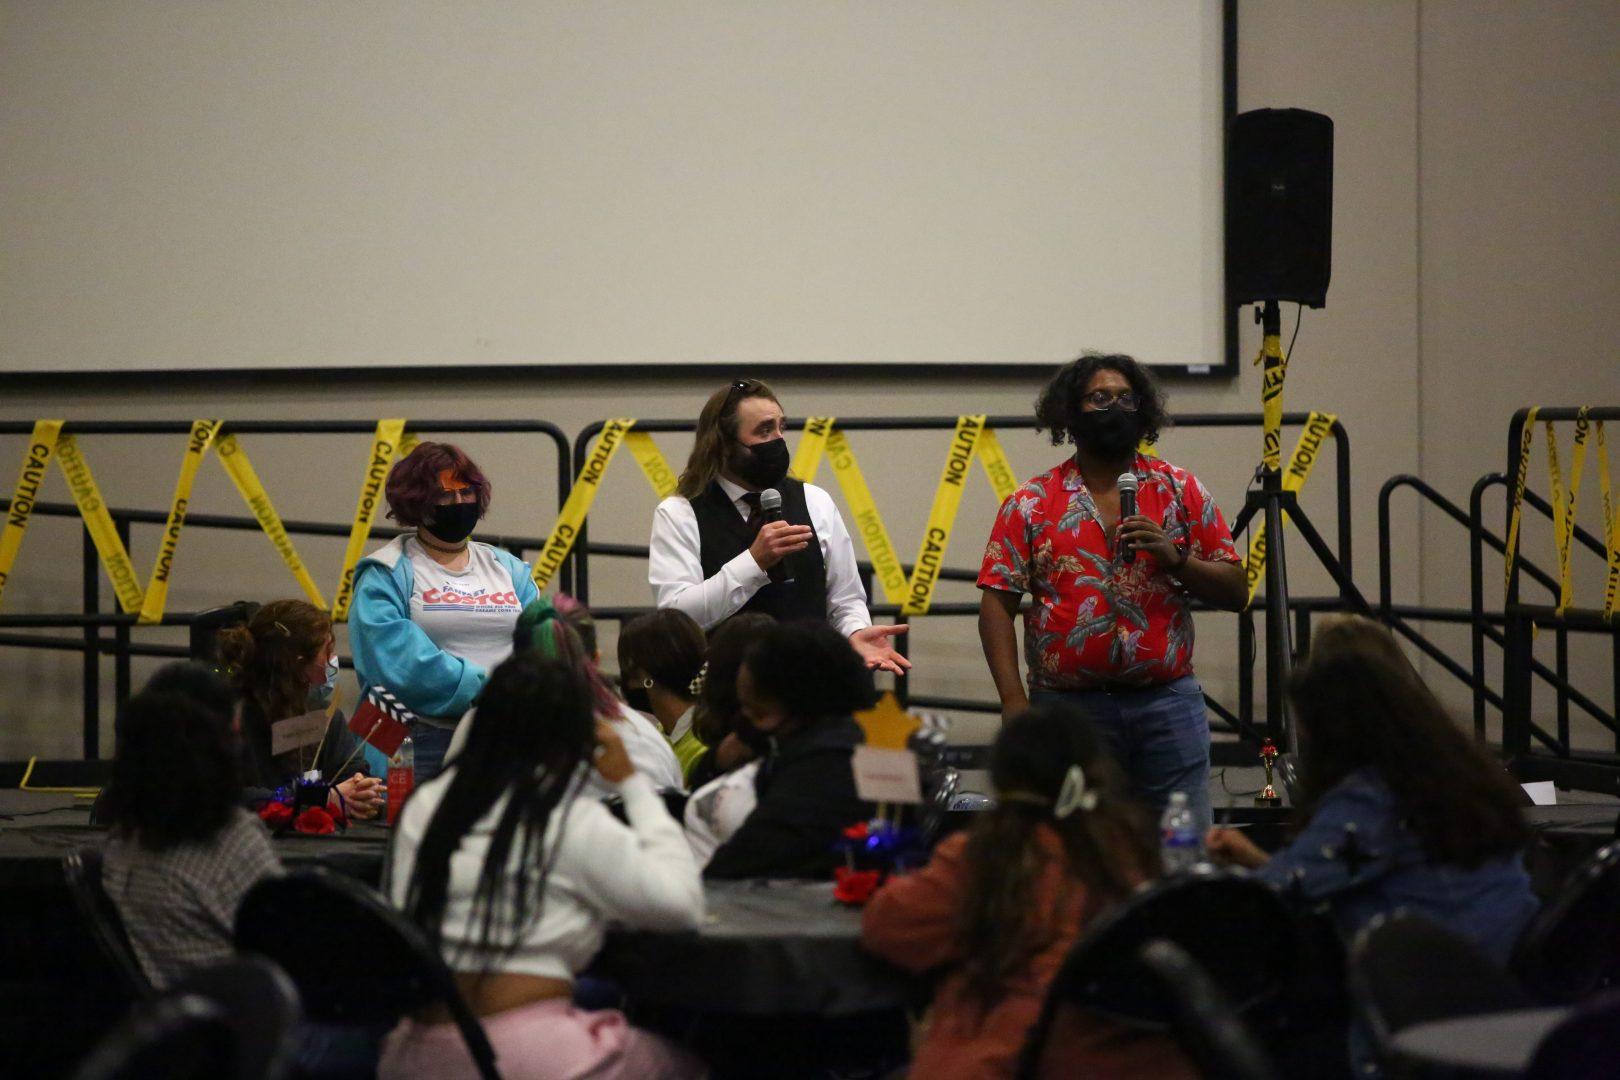 The Mission IMPROVable Comedy Team hosted the Hollywood Murder Mystery event to help students de-stress during exams (Adam Solis/The Collegian).